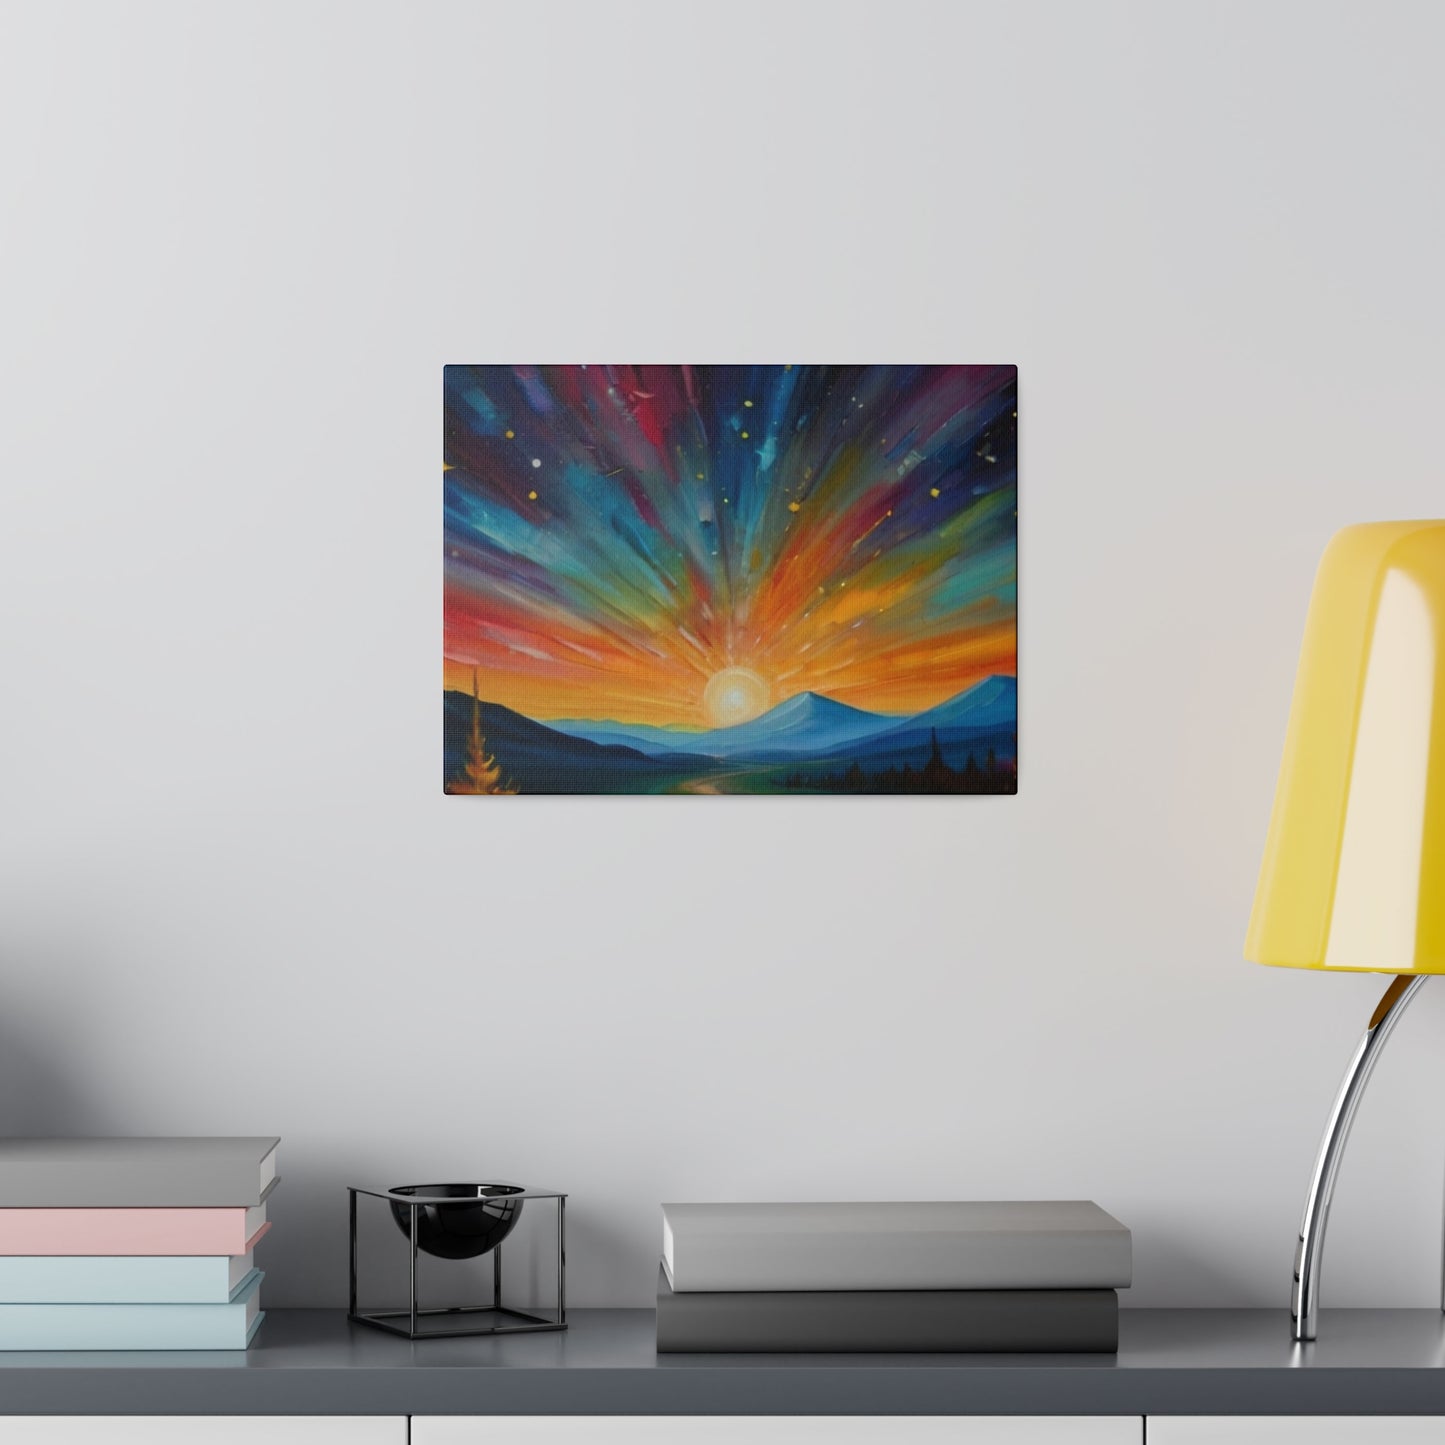 Colourful Sunset At Night - Matte Canvas, Stretched, 0.75"